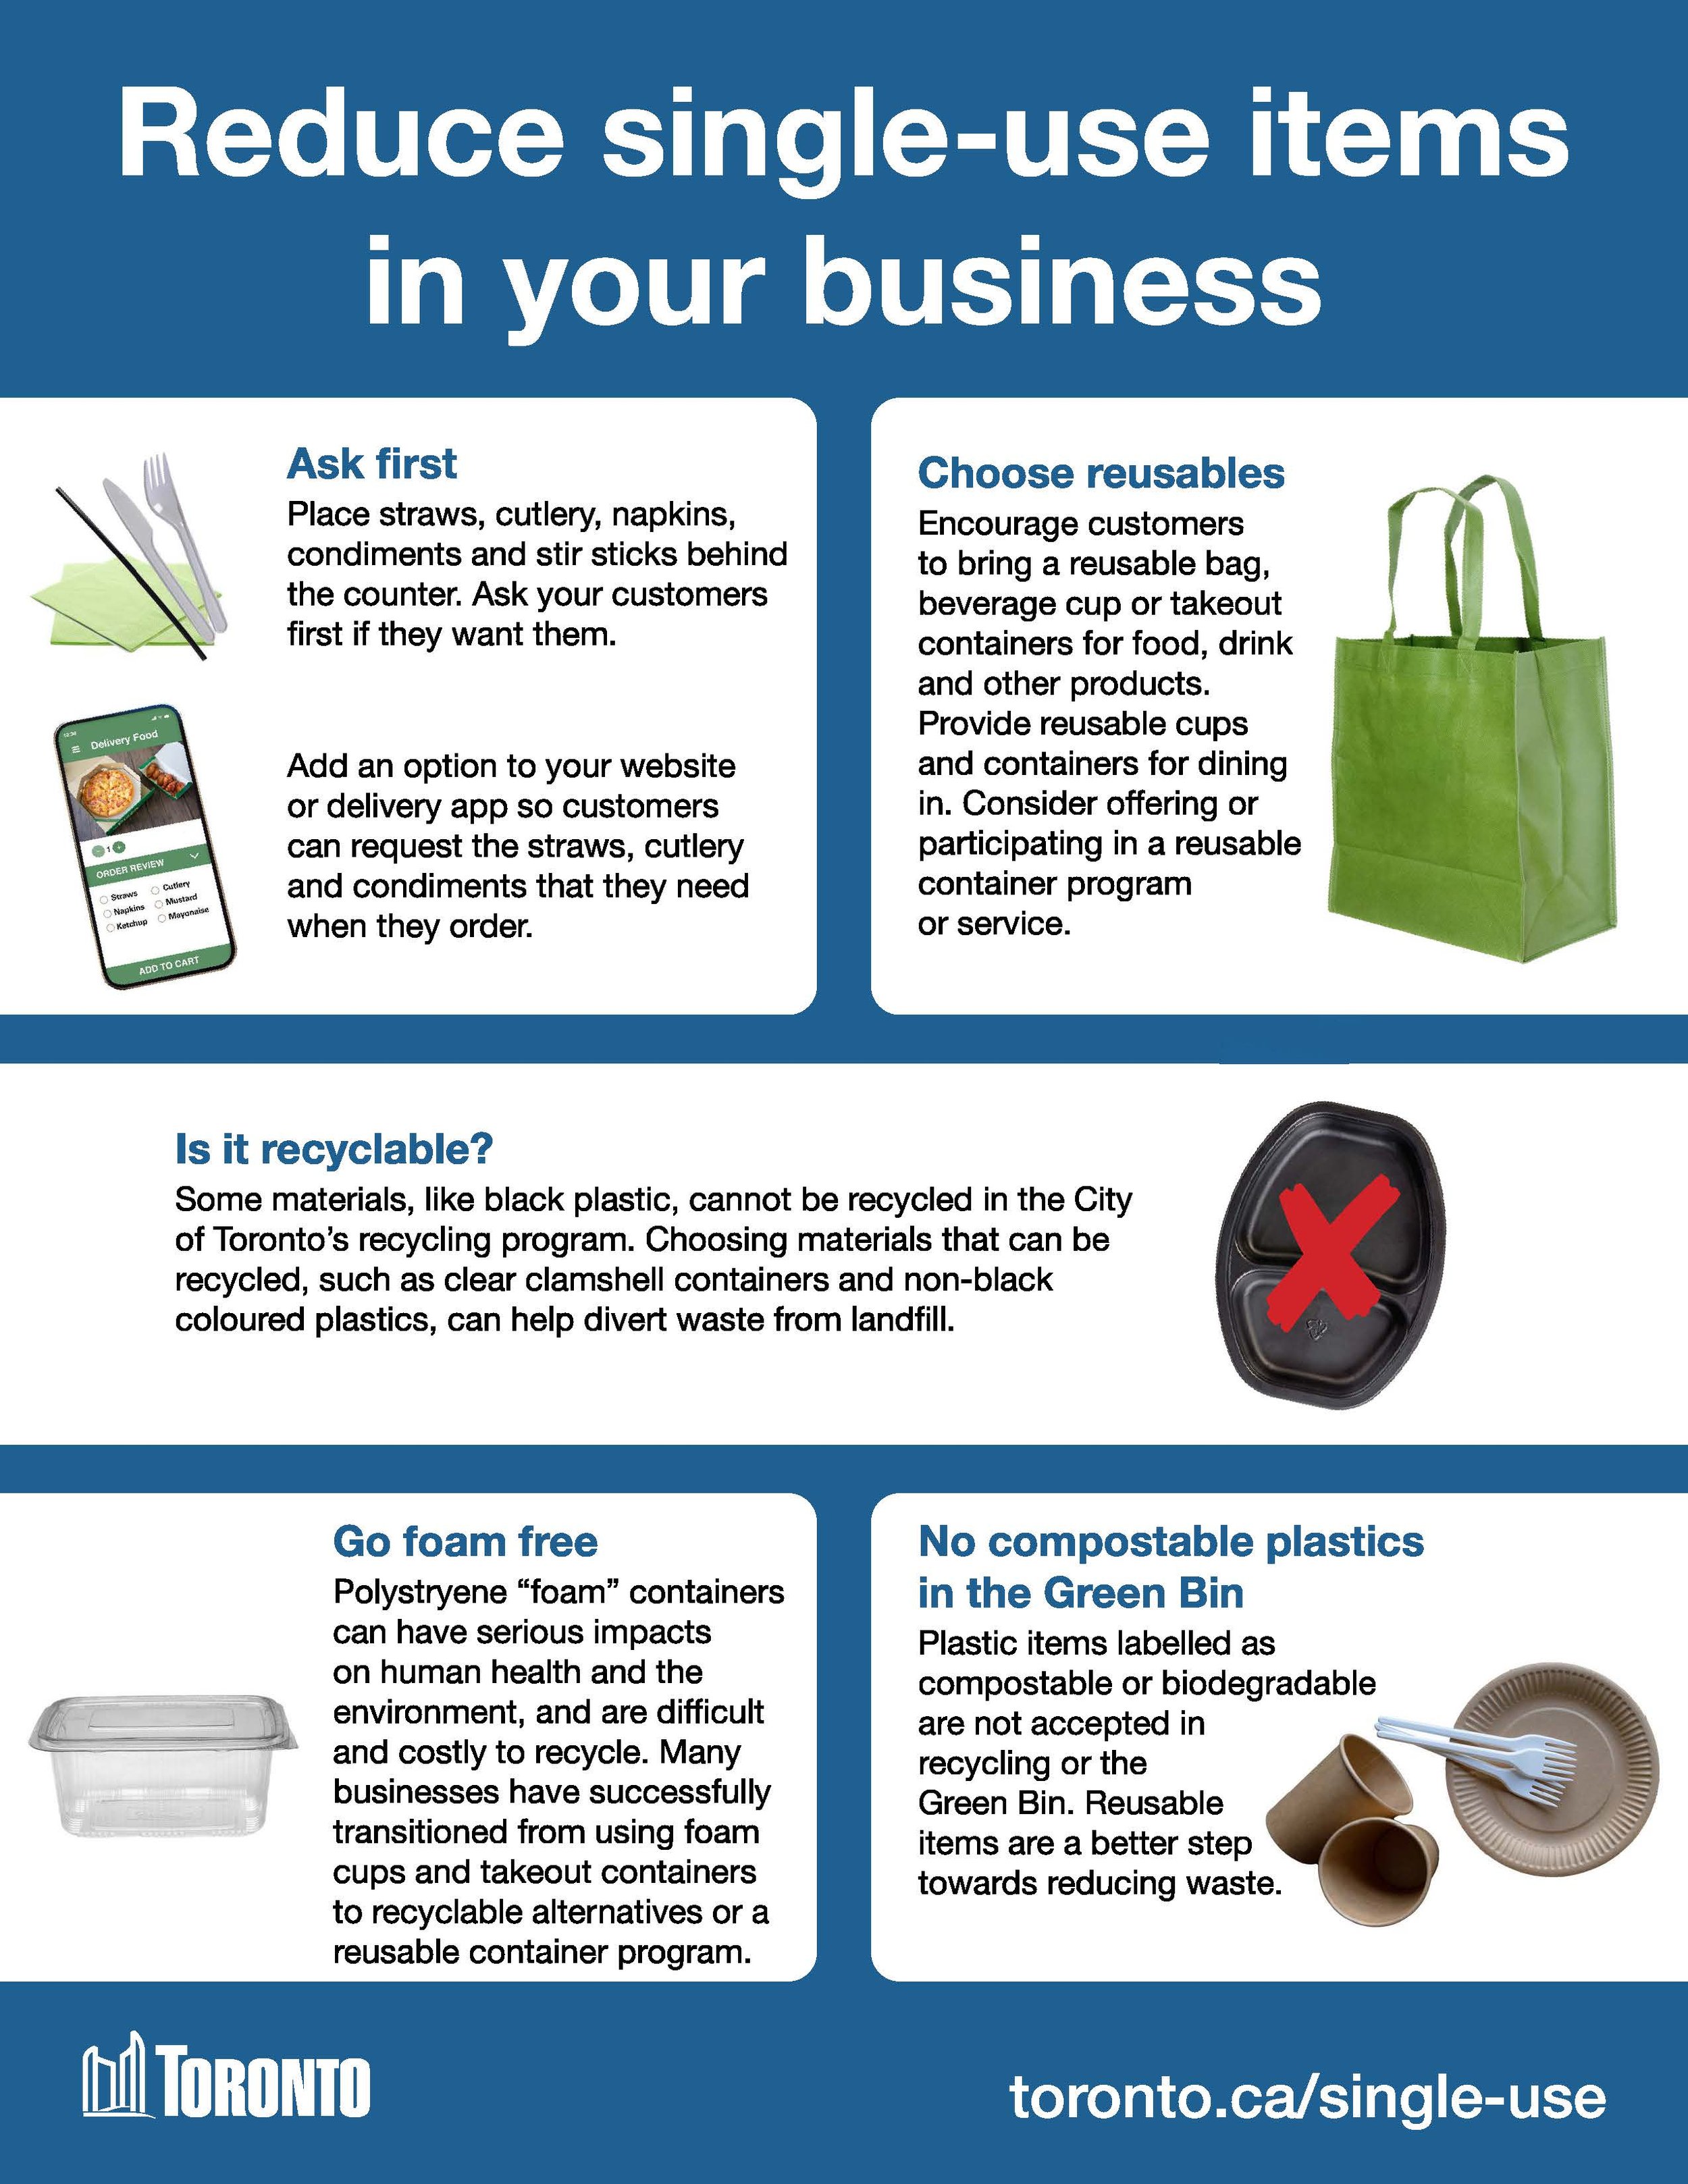 Reduce single-use items in your business